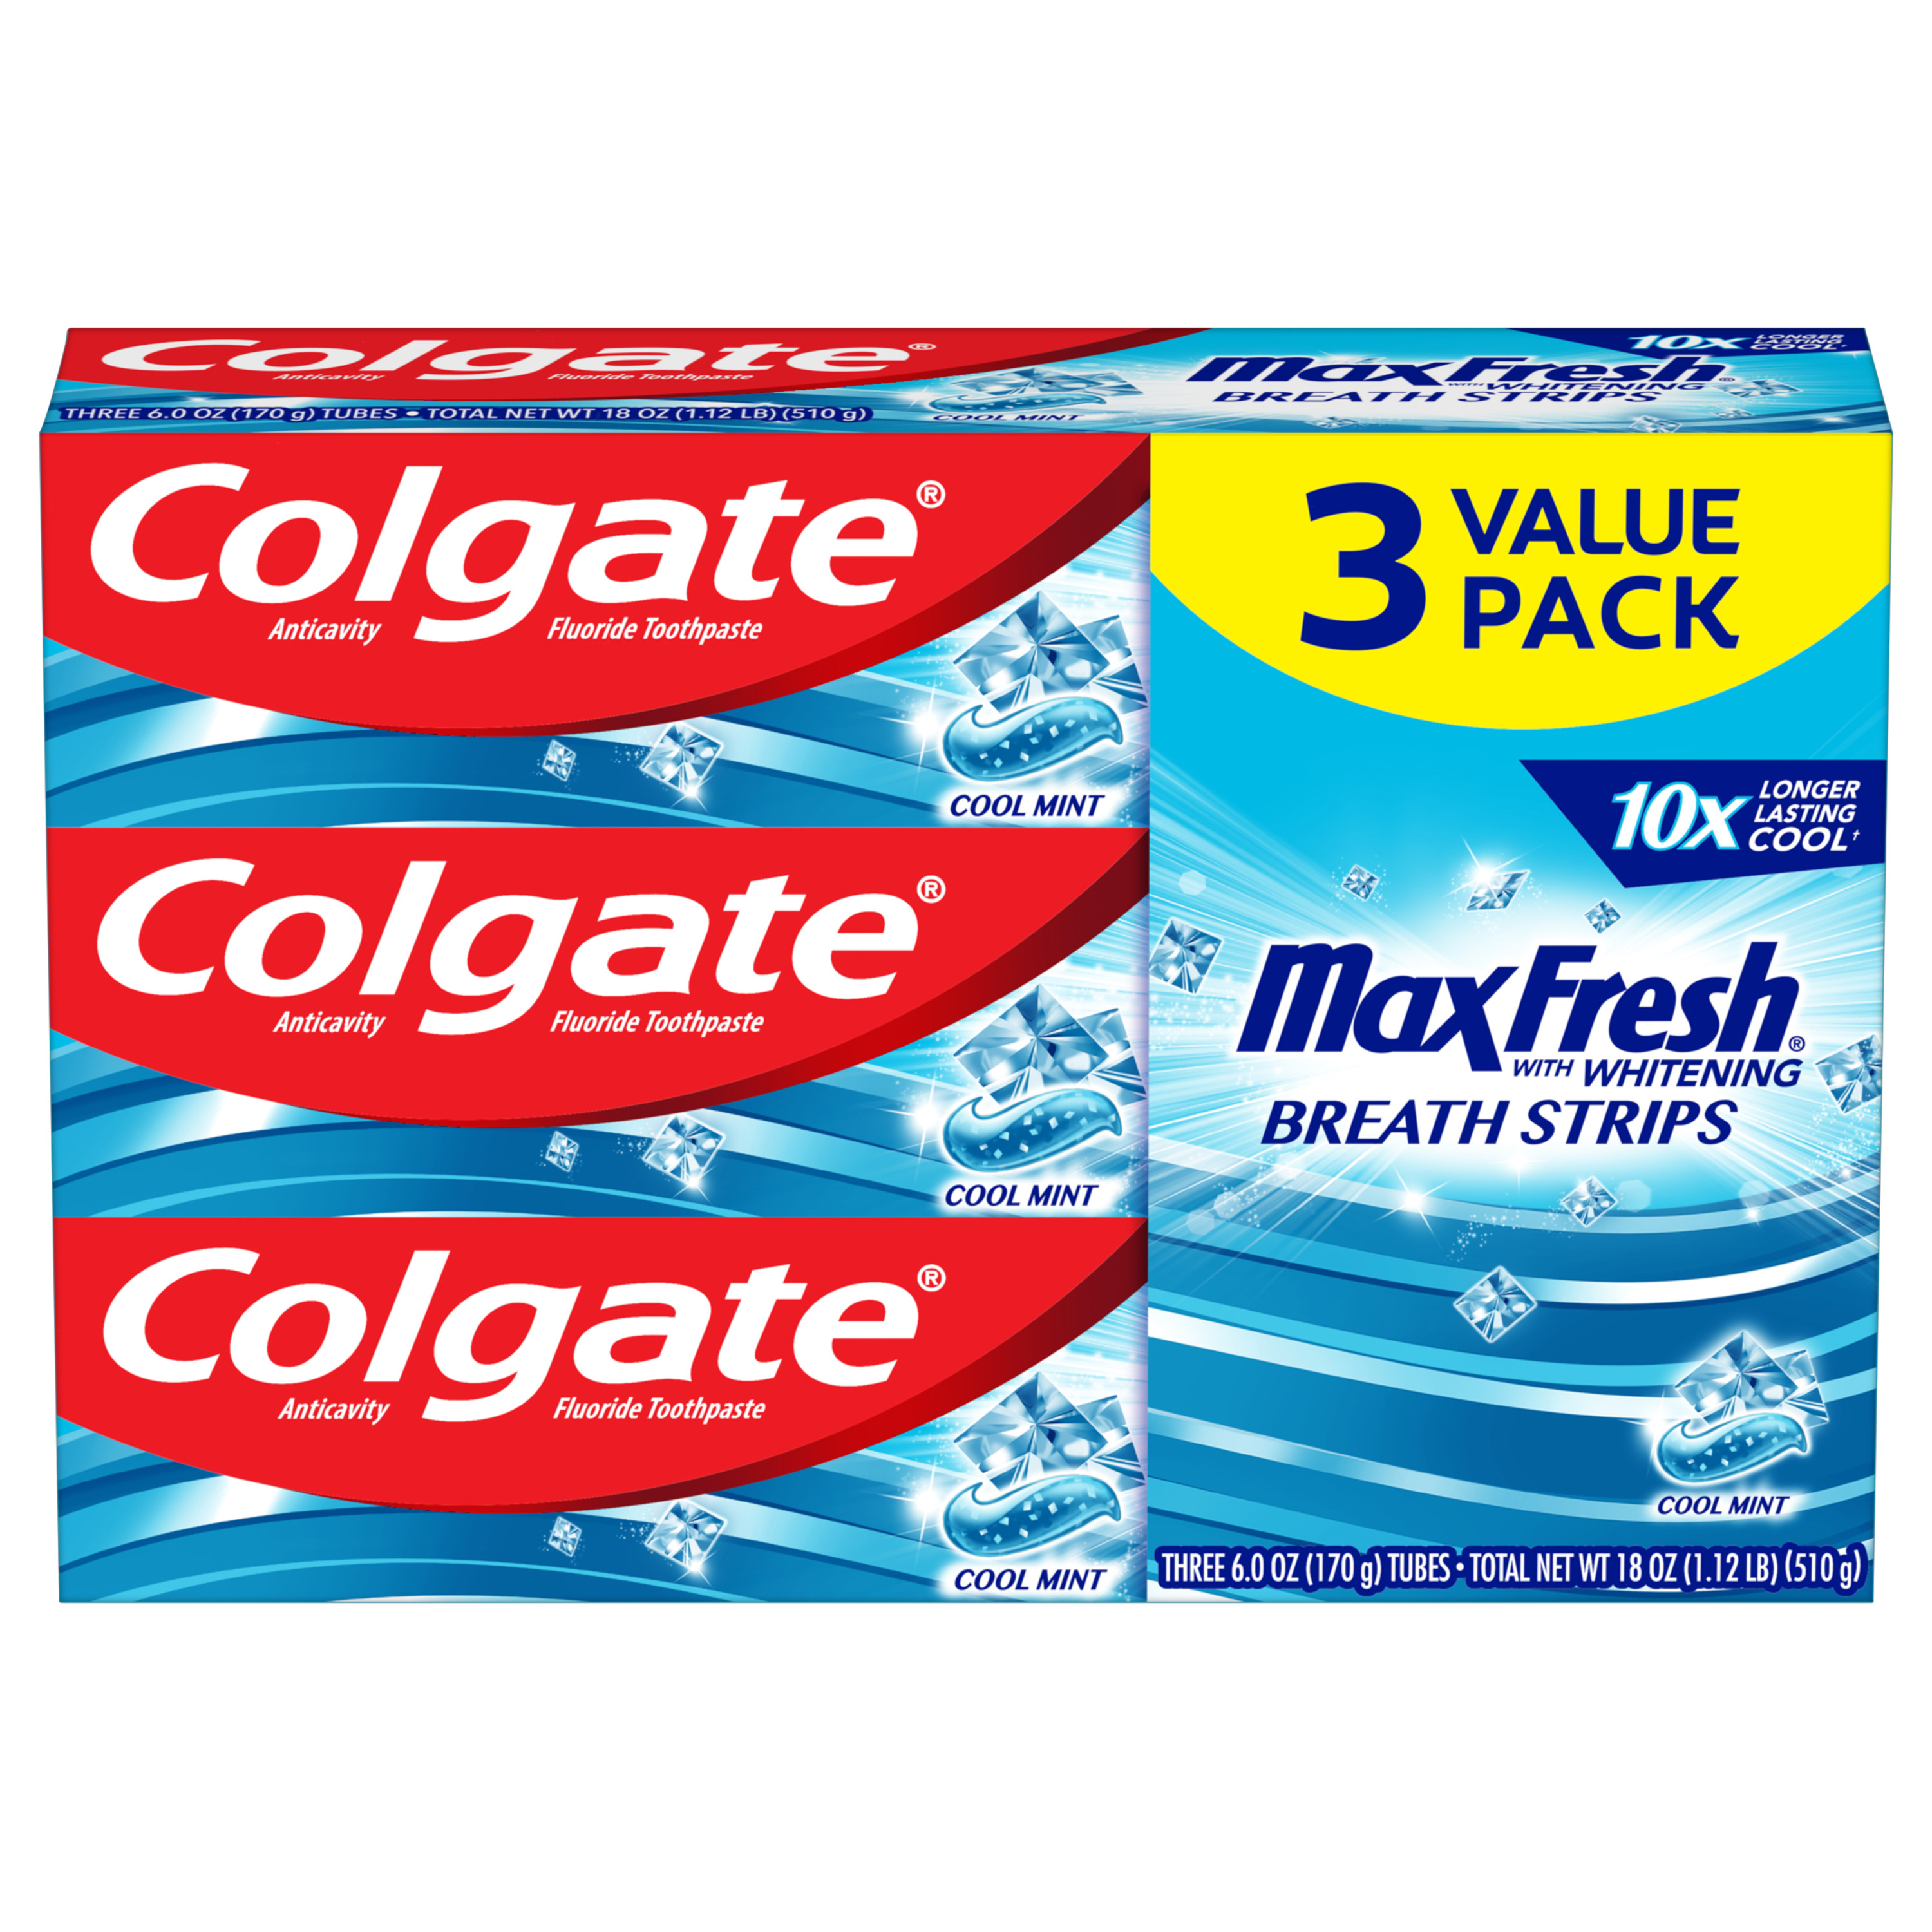 Colgate MaxFresh Stain Removing Toothpaste, Cool Mint, 3 Pack - image 1 of 17